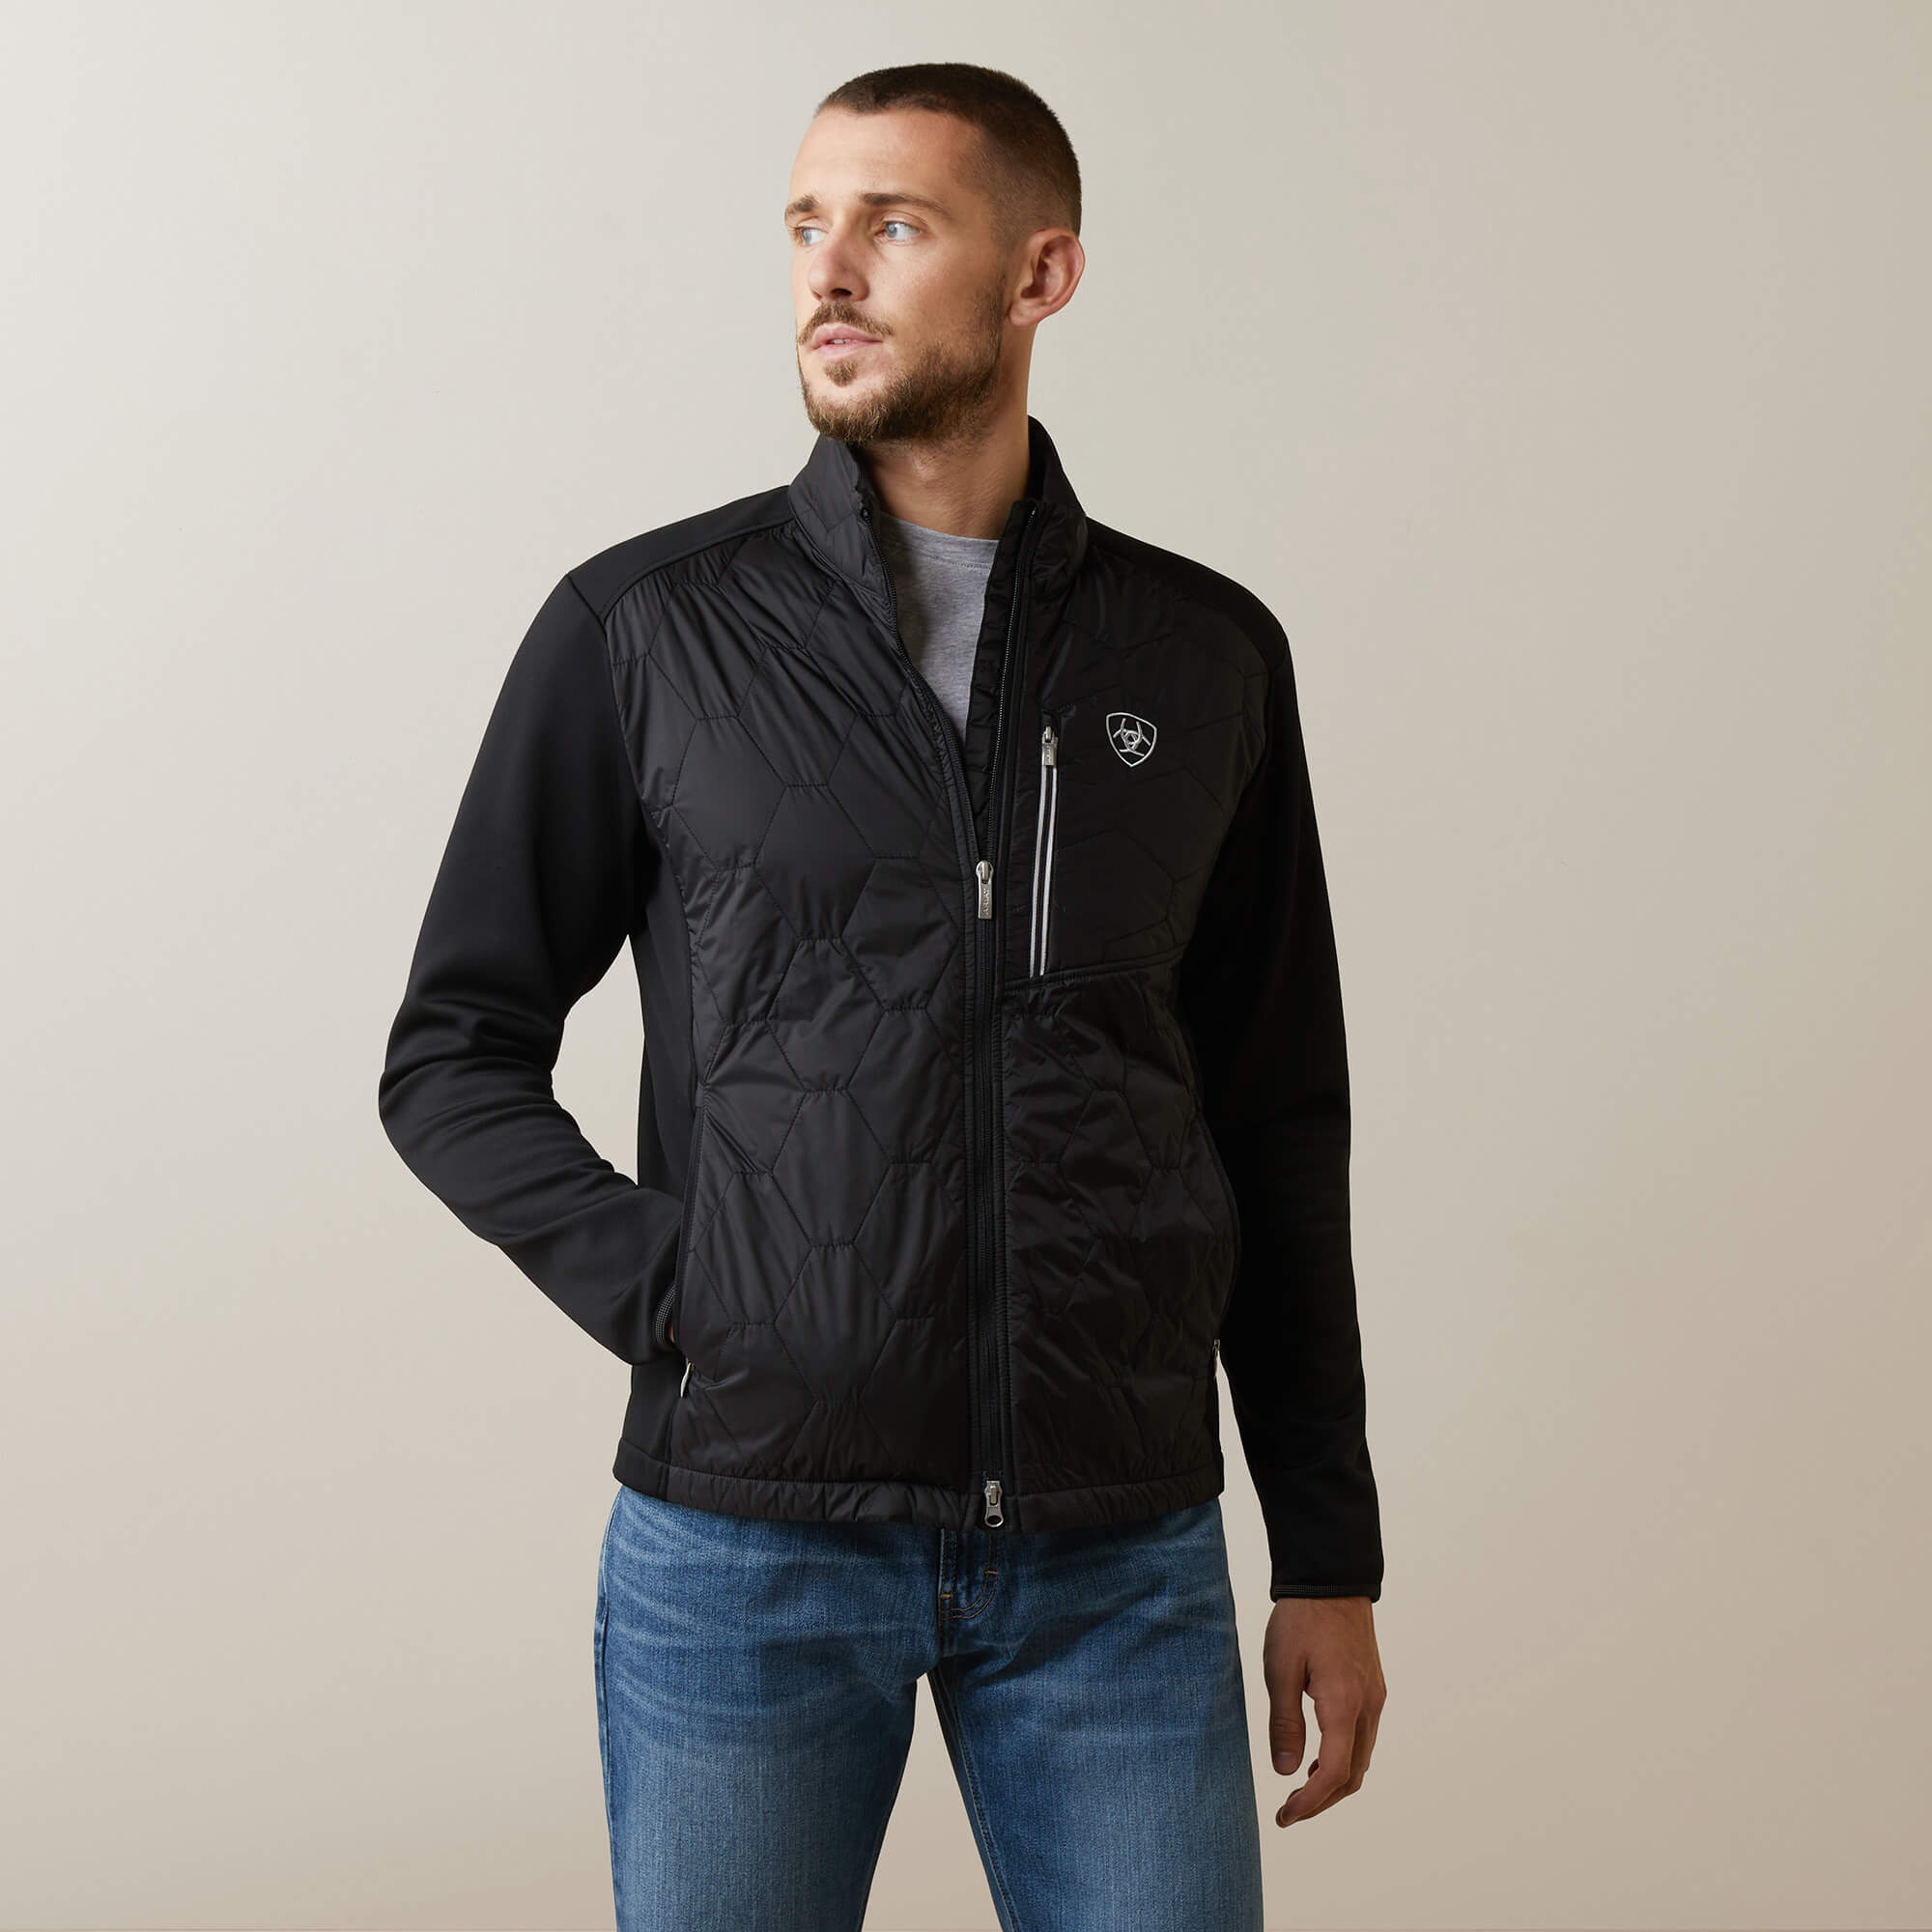 Ariat Fusion Insulated Men's Jacket